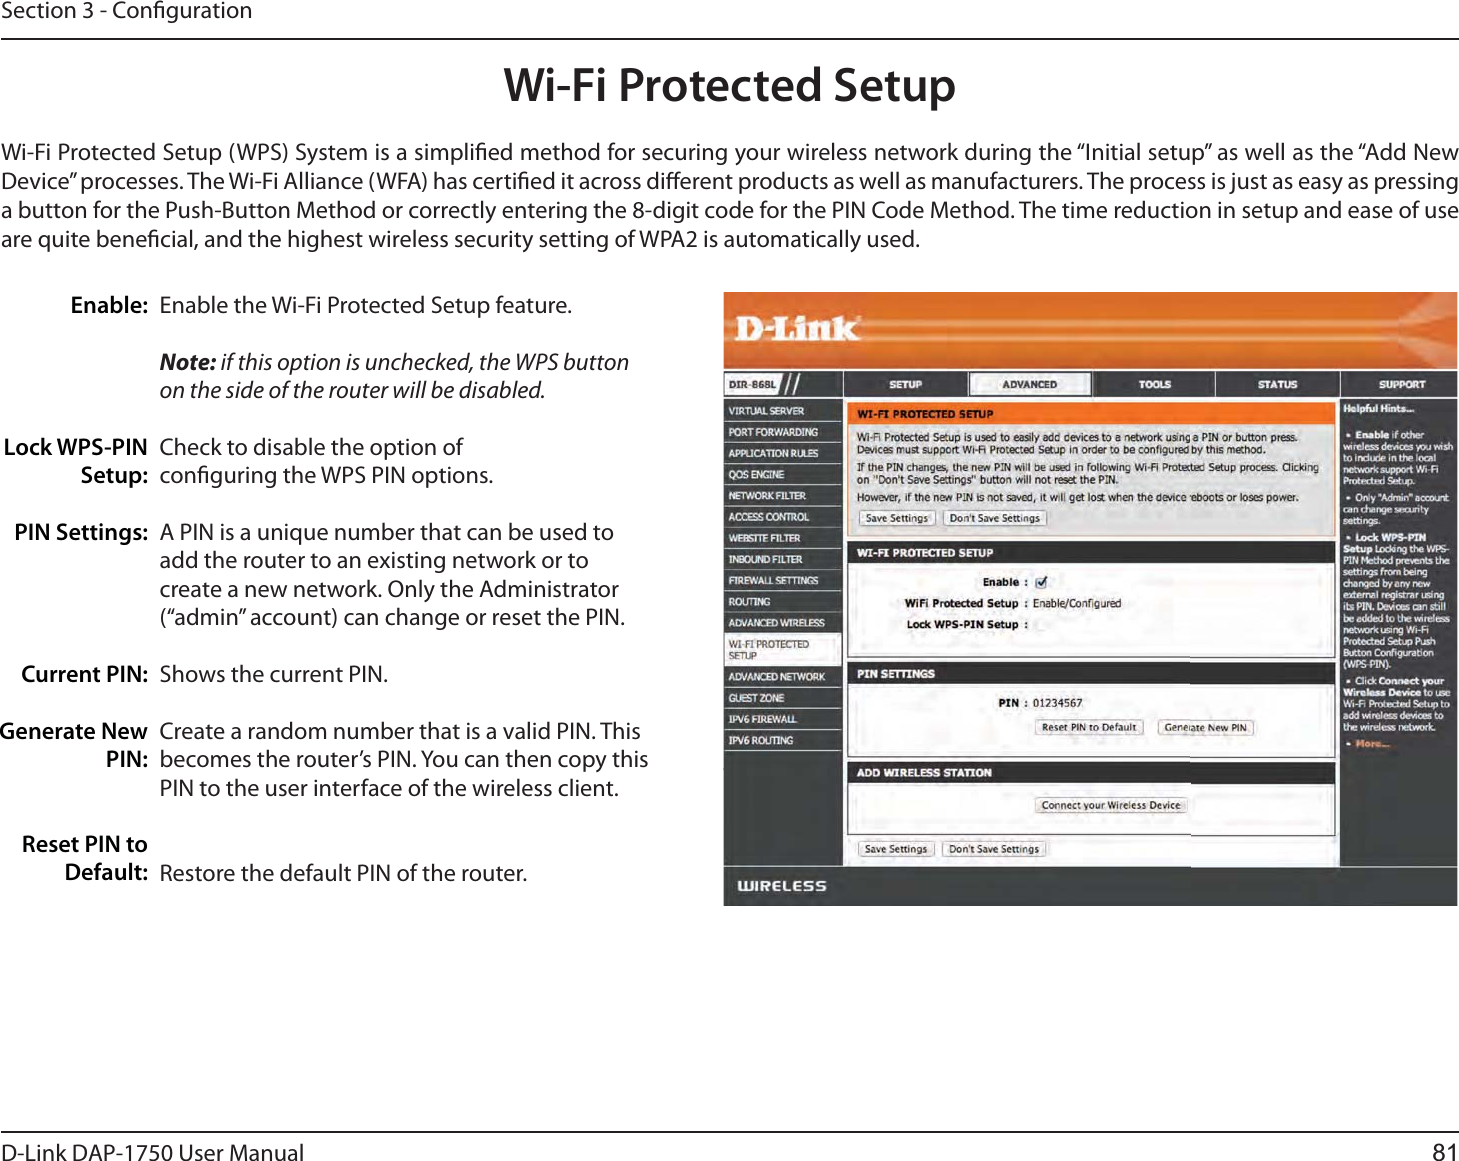 D-Link %&quot;1 User ManualSection 3 - CongurationWi-Fi Protected SetupEnable the Wi-Fi Protected Setup feature. Note: if this option is unchecked, the WPS button on the side of the router will be disabled.Check to disable the option of conguring the WPS PIN options.A PIN is a unique number that can be used to add the router to an existing network or to create a new network. Only the Administrator (“admin” account) can change or reset the PIN. Shows the current PIN. Create a random number that is a valid PIN. This becomes the router’s PIN. You can then copy this PIN to the user interface of the wireless client.Restore the default PIN of the router. Enable:Lock WPS-PIN Setup:PIN Settings:Current PIN:Generate New PIN:Reset PIN to Default:Wi-Fi Protected Setup (WPS) System is a simplied method for securing your wireless network during the “Initial setup” as well as the “Add New Device” processes. The Wi-Fi Alliance (WFA) has certied it across dierent products as well as manufacturers. The process is just as easy as pressing a button for the Push-Button Method or correctly entering the 8-digit code for the PIN Code Method. The time reduction in setup and ease of use are quite benecial, and the highest wireless security setting of WPA2 is automatically used.81